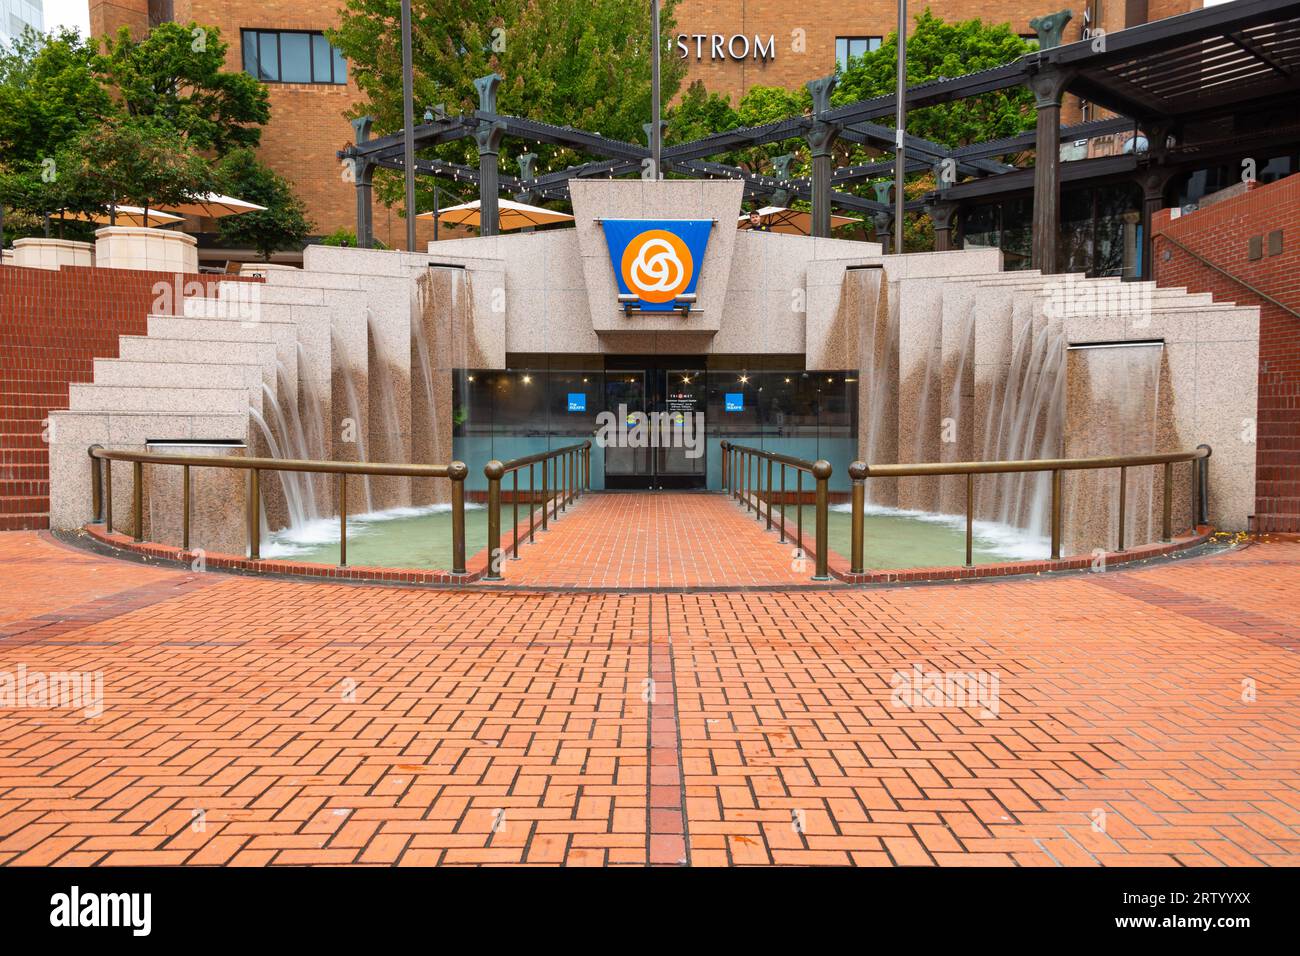 Entrance to the Trimet office and fountains in Pioneer Courthouse Square in downtown Portland Oregon Stock Photo